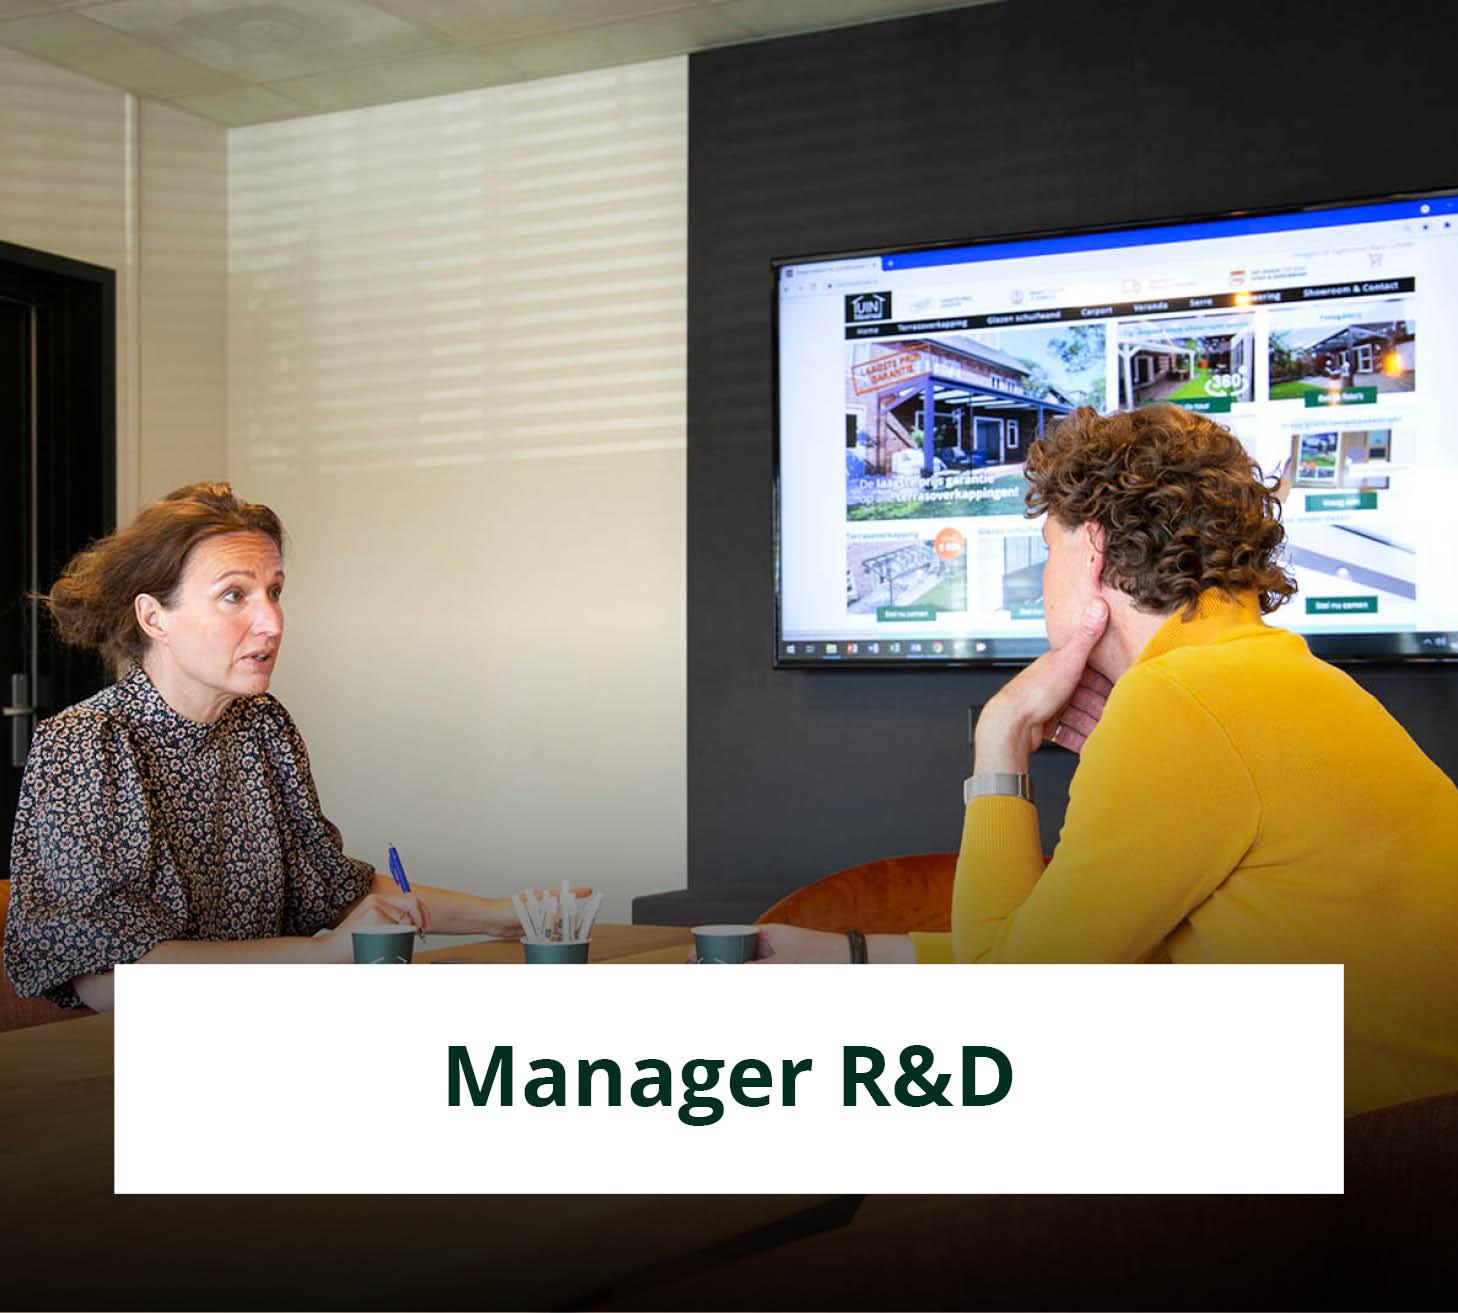 Manager R&D